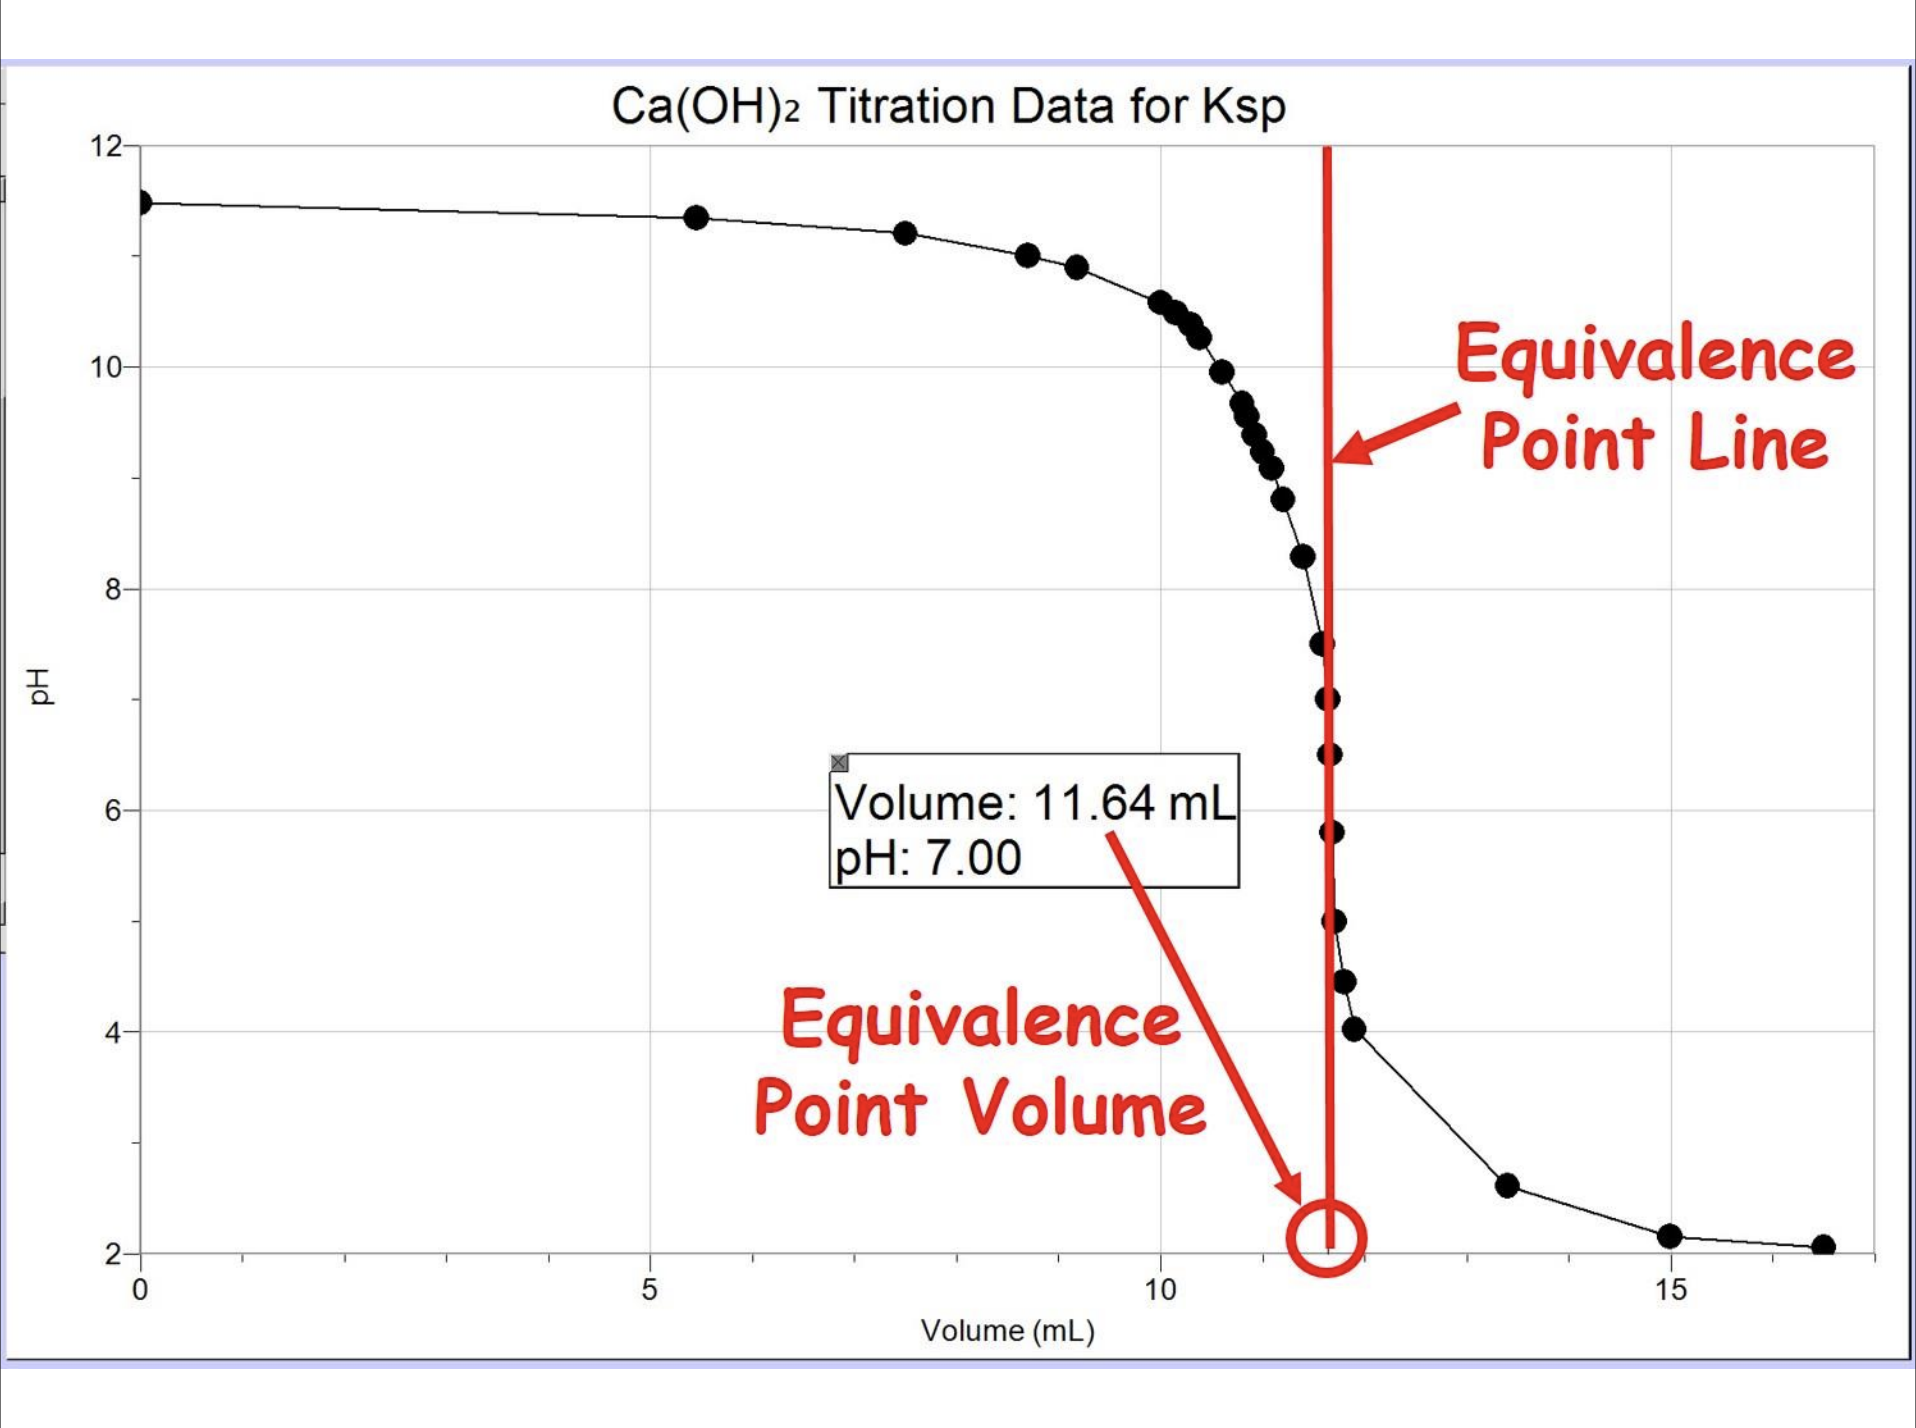 Ca(OH)2 Titration Data for Ksp
12-
Equivalence
Point Line
10-
8-
Volume: 11.64 mL
pH: 7.00
6-
Equivalence
Point Volume
2-
10
15
Volume (mL)
нd
